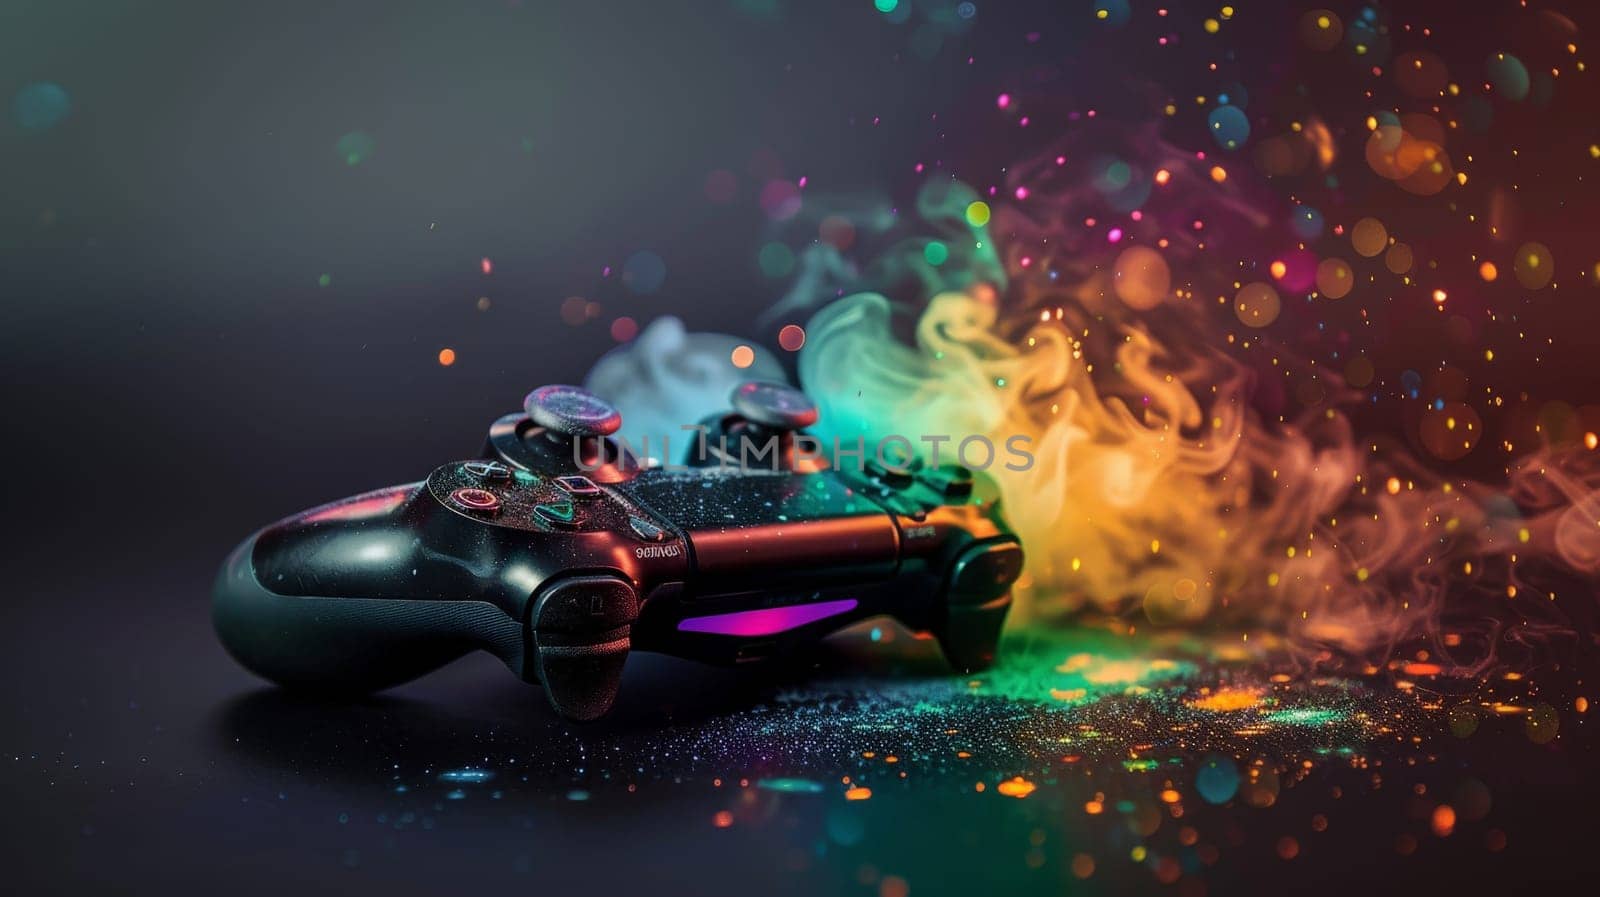 A video game controller is on a black surface with colorful smoke and sparks. The controller is surrounded by a colorful and vibrant atmosphere, giving the impression of a fun